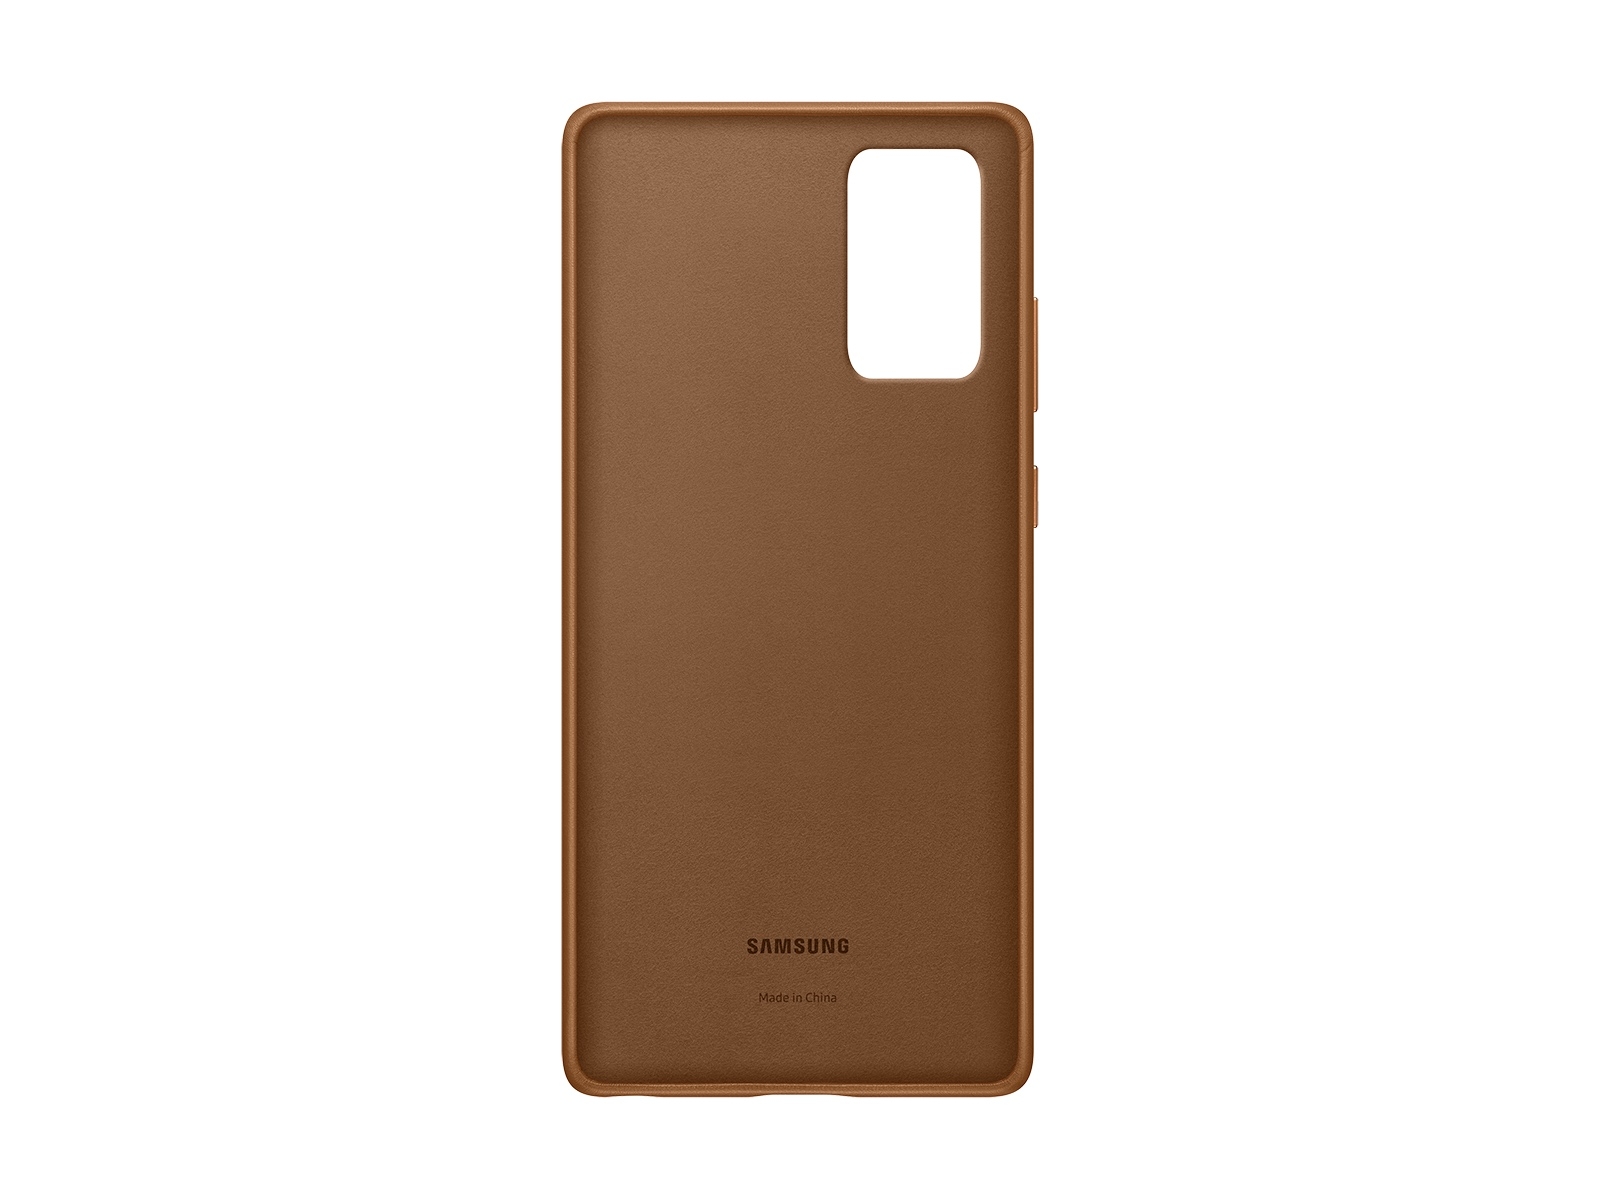 Thumbnail image of Galaxy Note20 5G Leather Cover, Brown